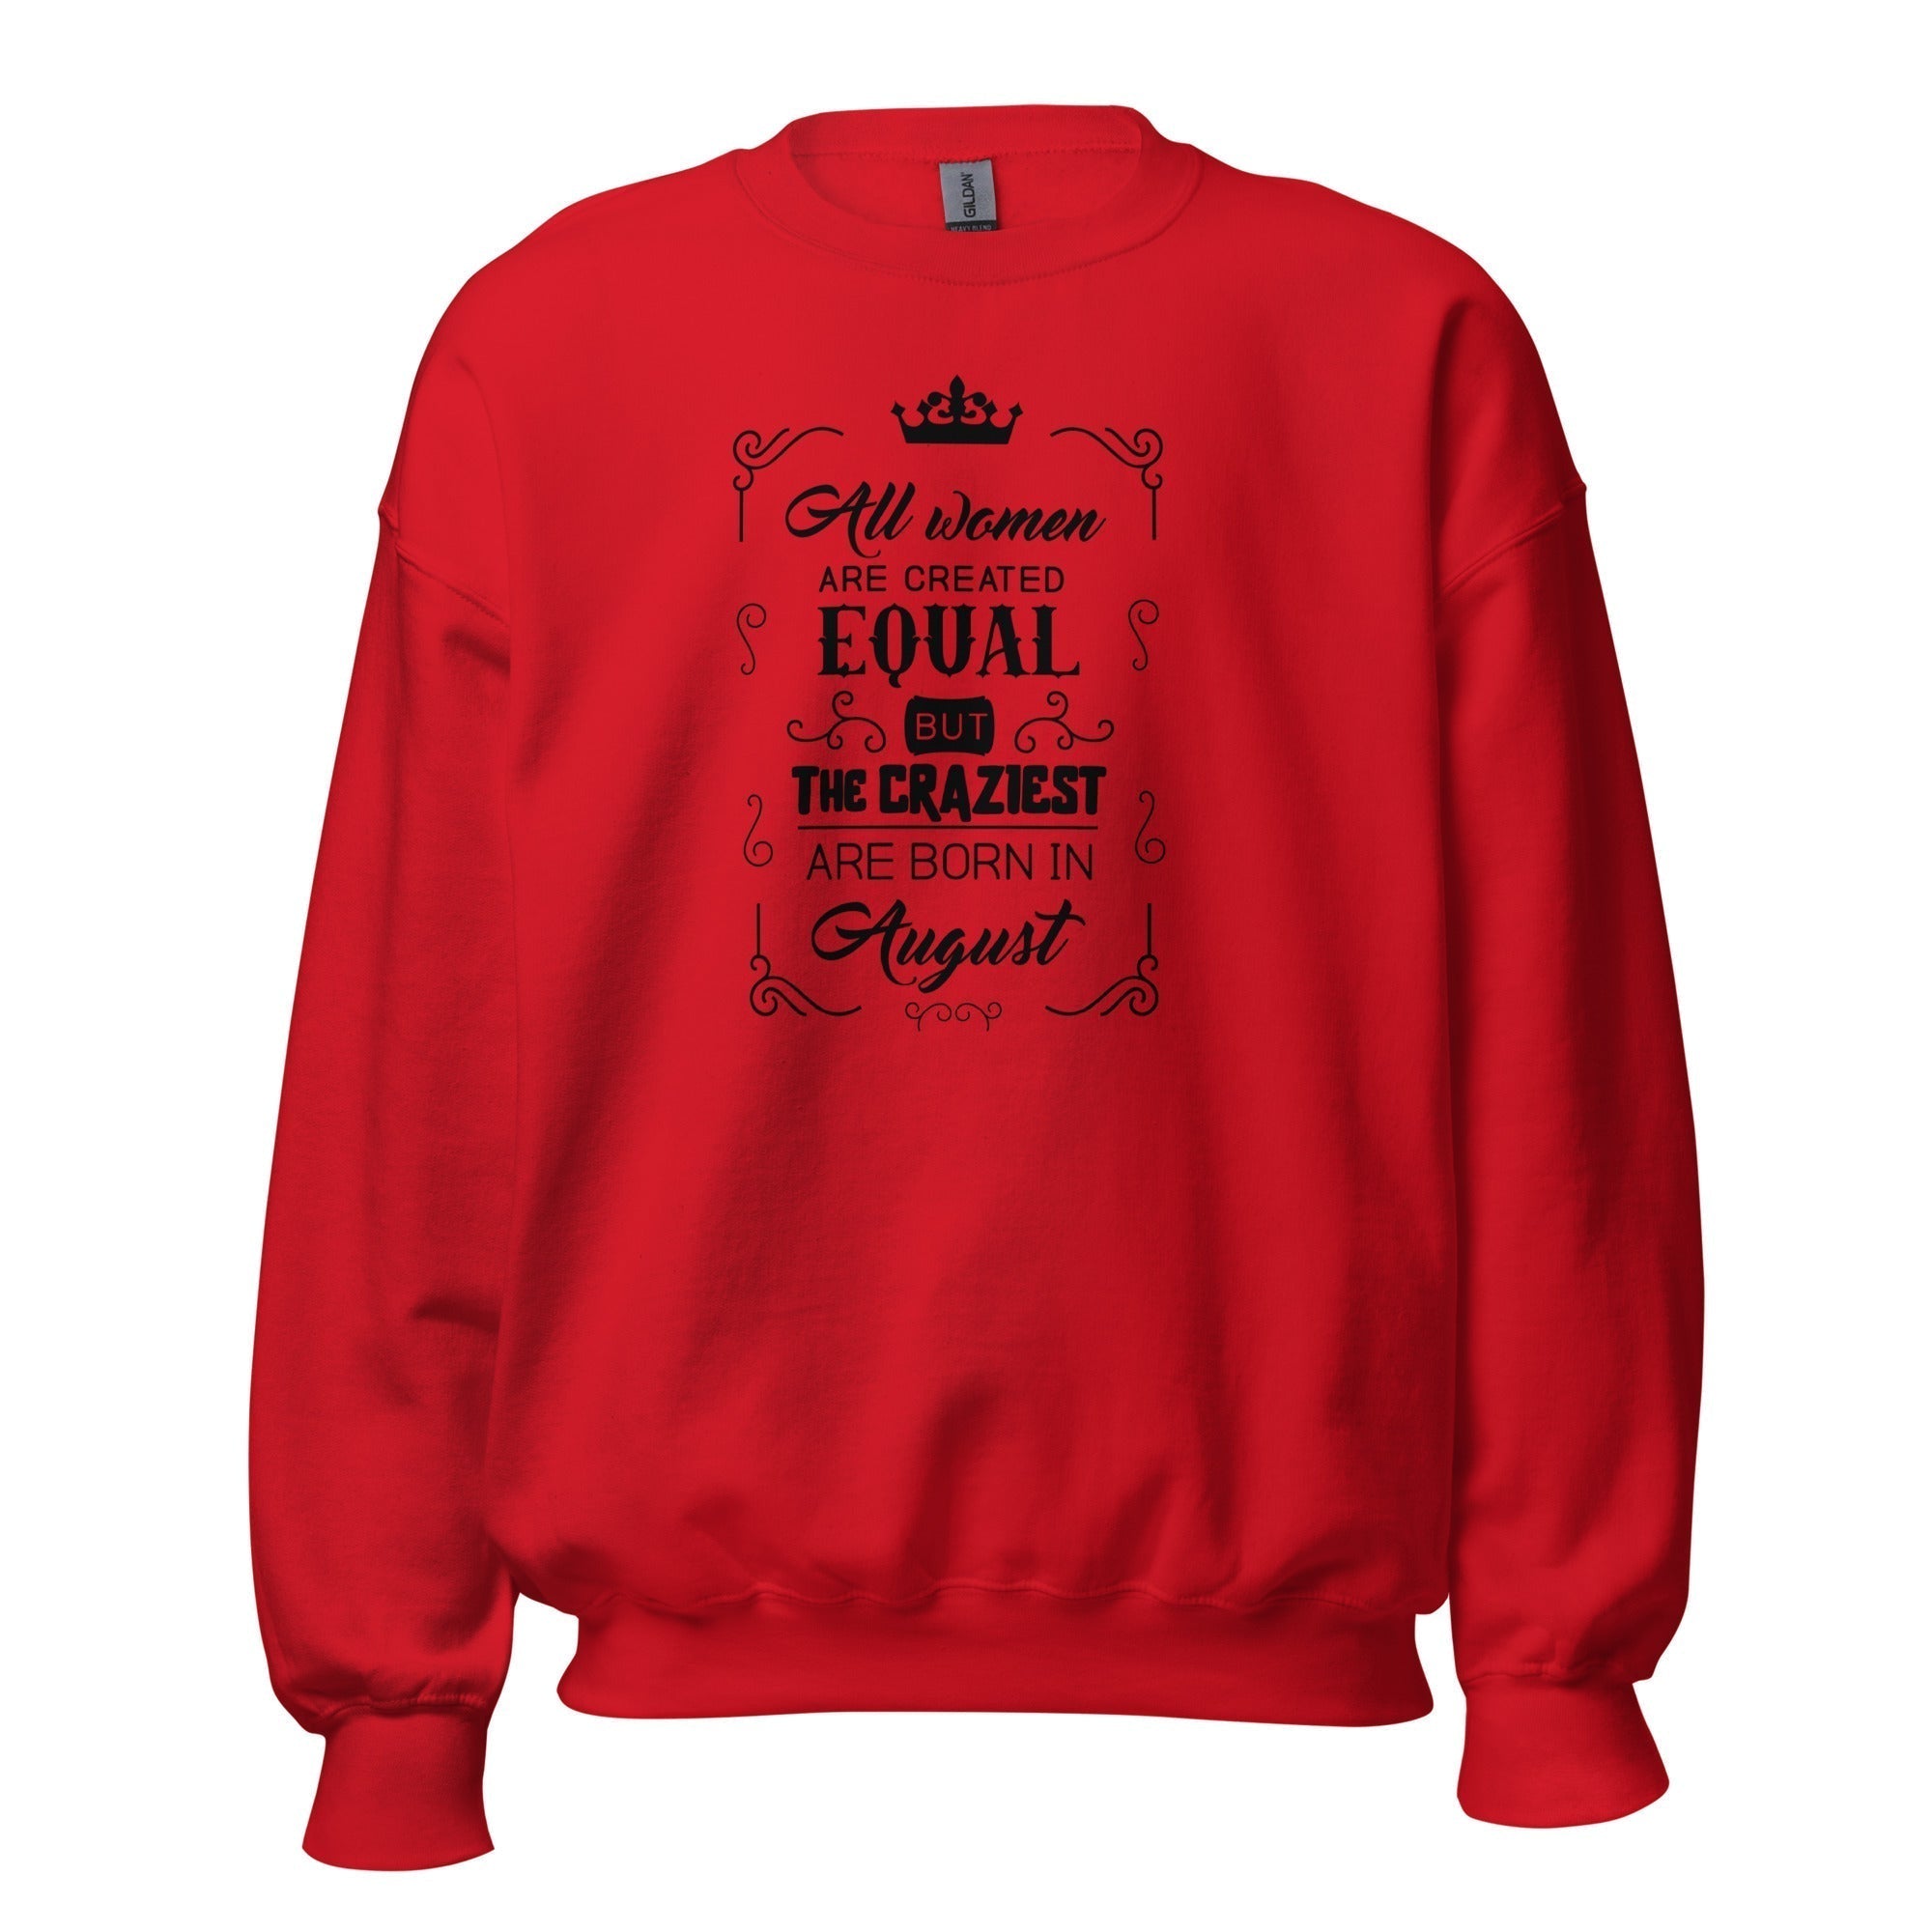 Women's Crew Neck Sweatshirt - All Women Are Created Equal But The Craziest Are Born In August - GRAPHIC T-SHIRTS